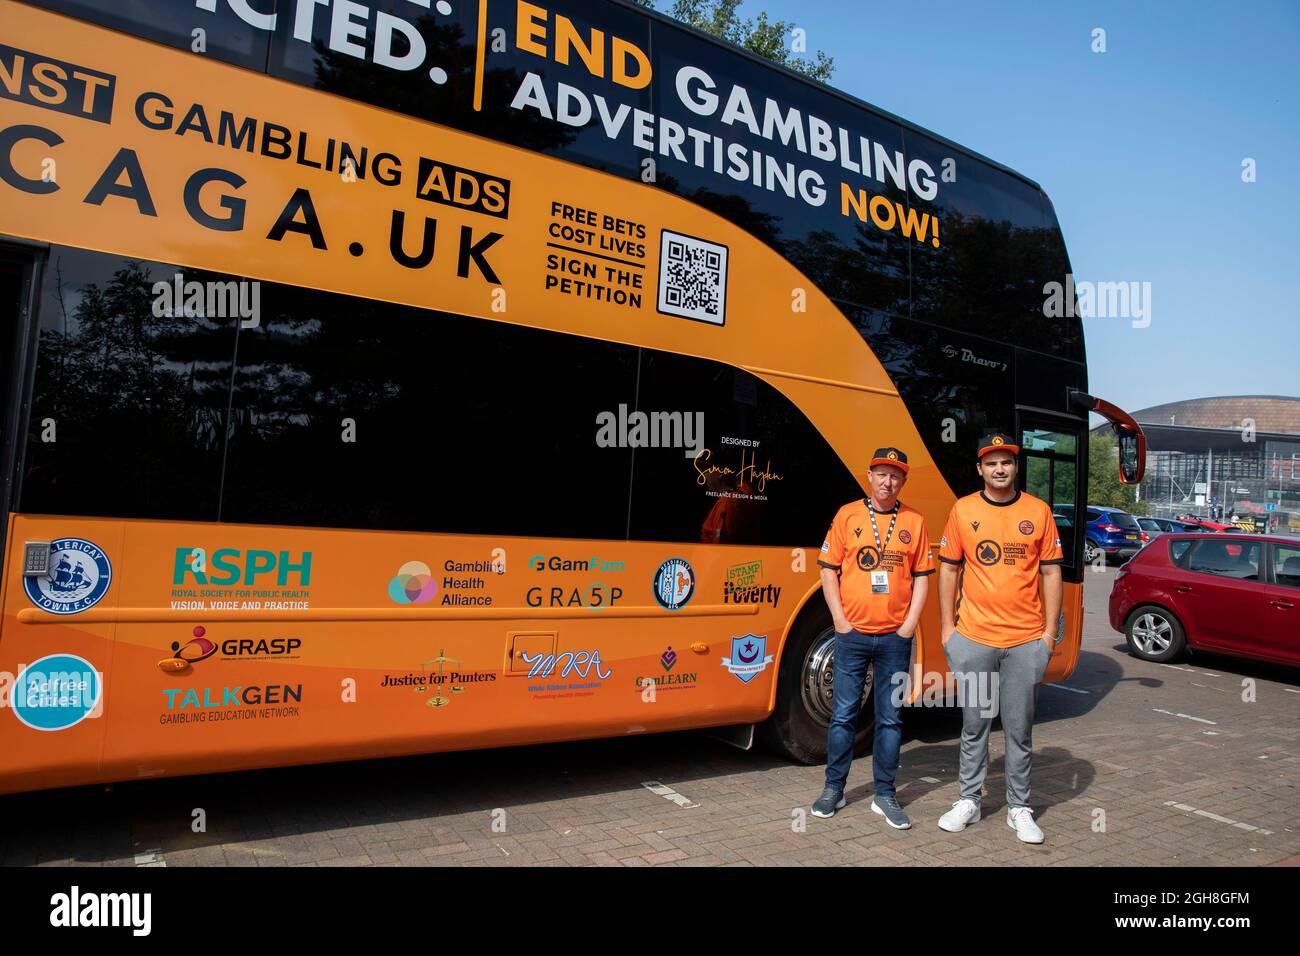 Cardiff, Wales, UK. 6th Sep, 2021. Nick Phillips and Matt Zarb-Cousin with the Coalition Against Gambling Ads (CAGA) bus near the Senedd Cymru Welsh Parliament in Cardiff Bay, on the first day of its UK-wide city tour. The campaign aims to end all gambling advertising, promotion and sponsorship. Nick Phillips says gambling left him suicidal and bankrupt. Director of CAGA, Zarb-Cousin, says people should not be encouraged to gamble. Credit: Mark Hawkins/Alamy Live News Stock Photo